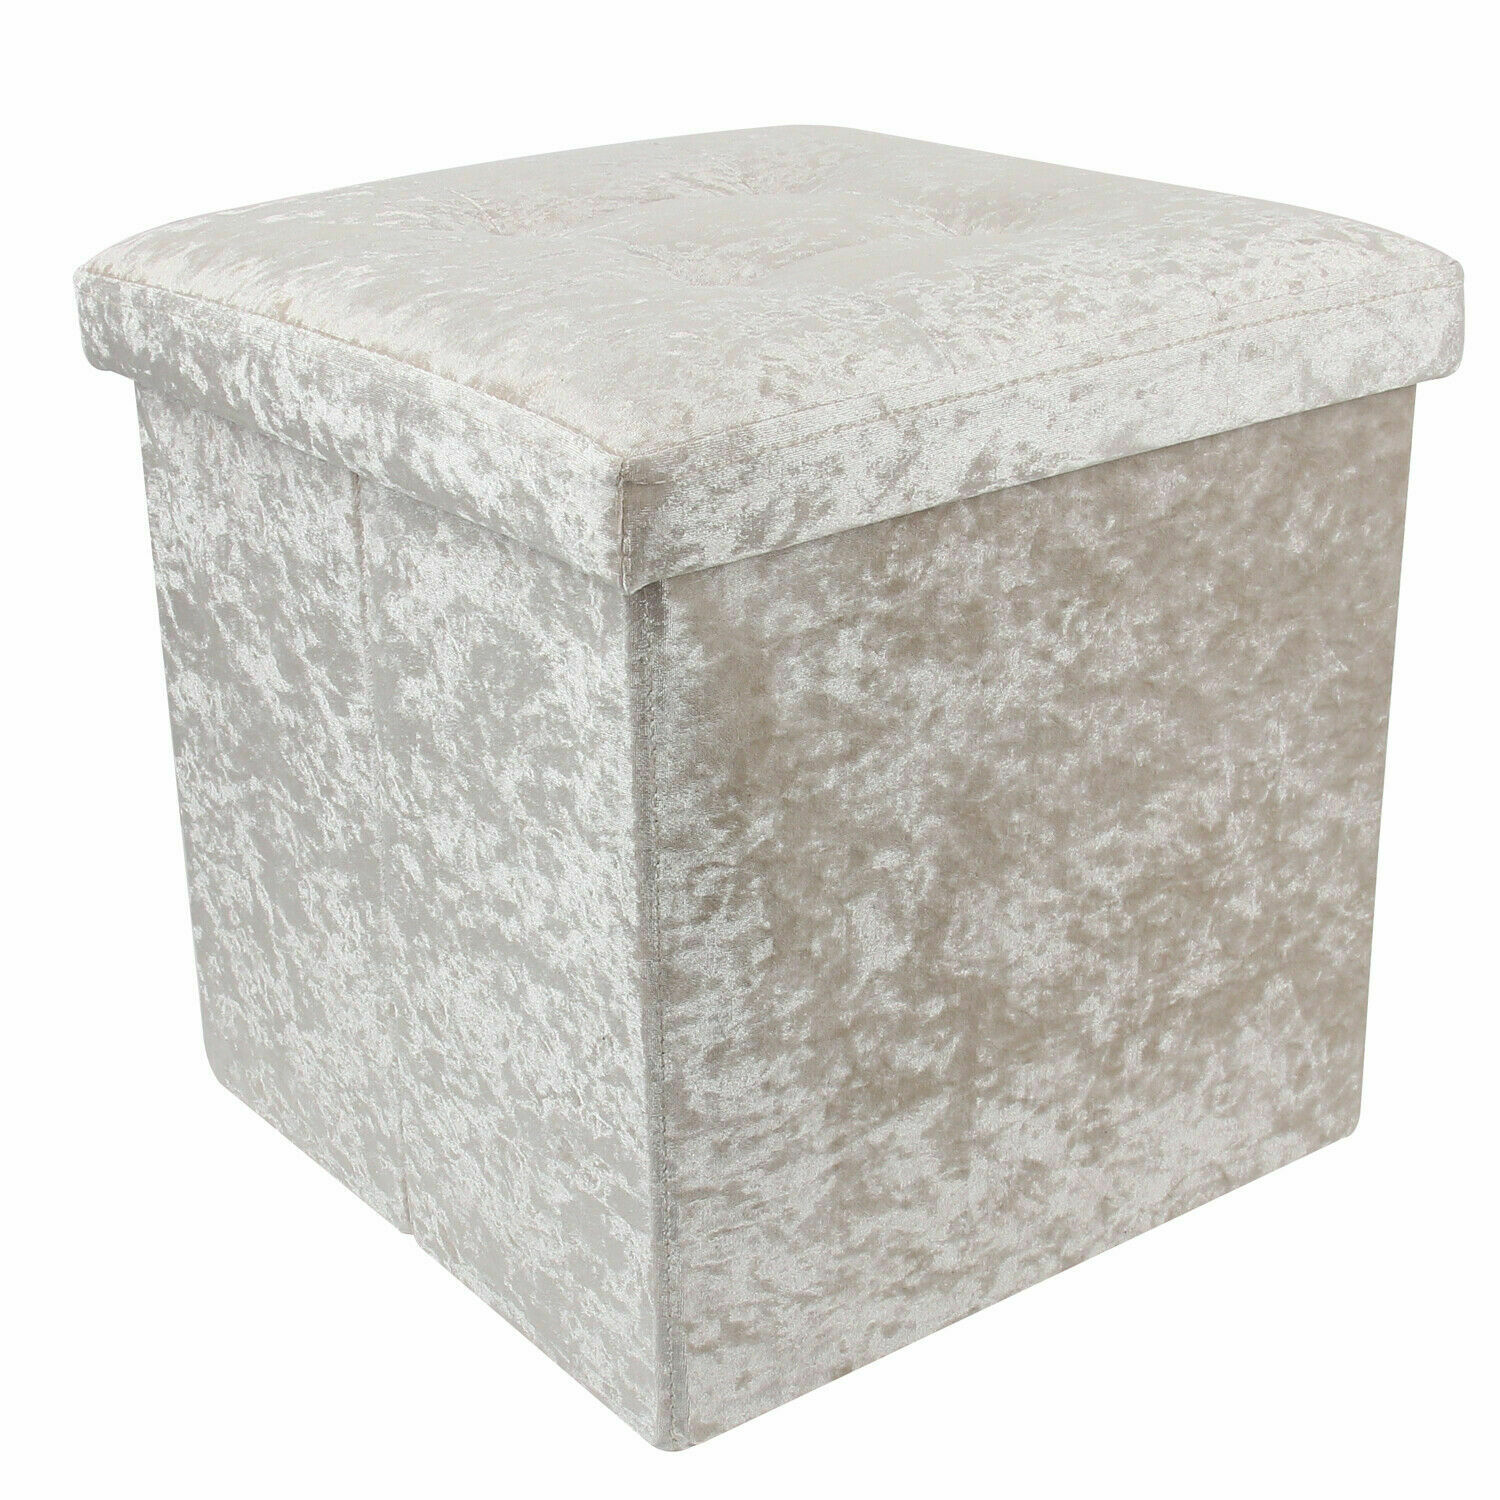 Crushed Velvet Diamante Storage Ottoman Seat Box Pouffee Foot Stool Cover Home 